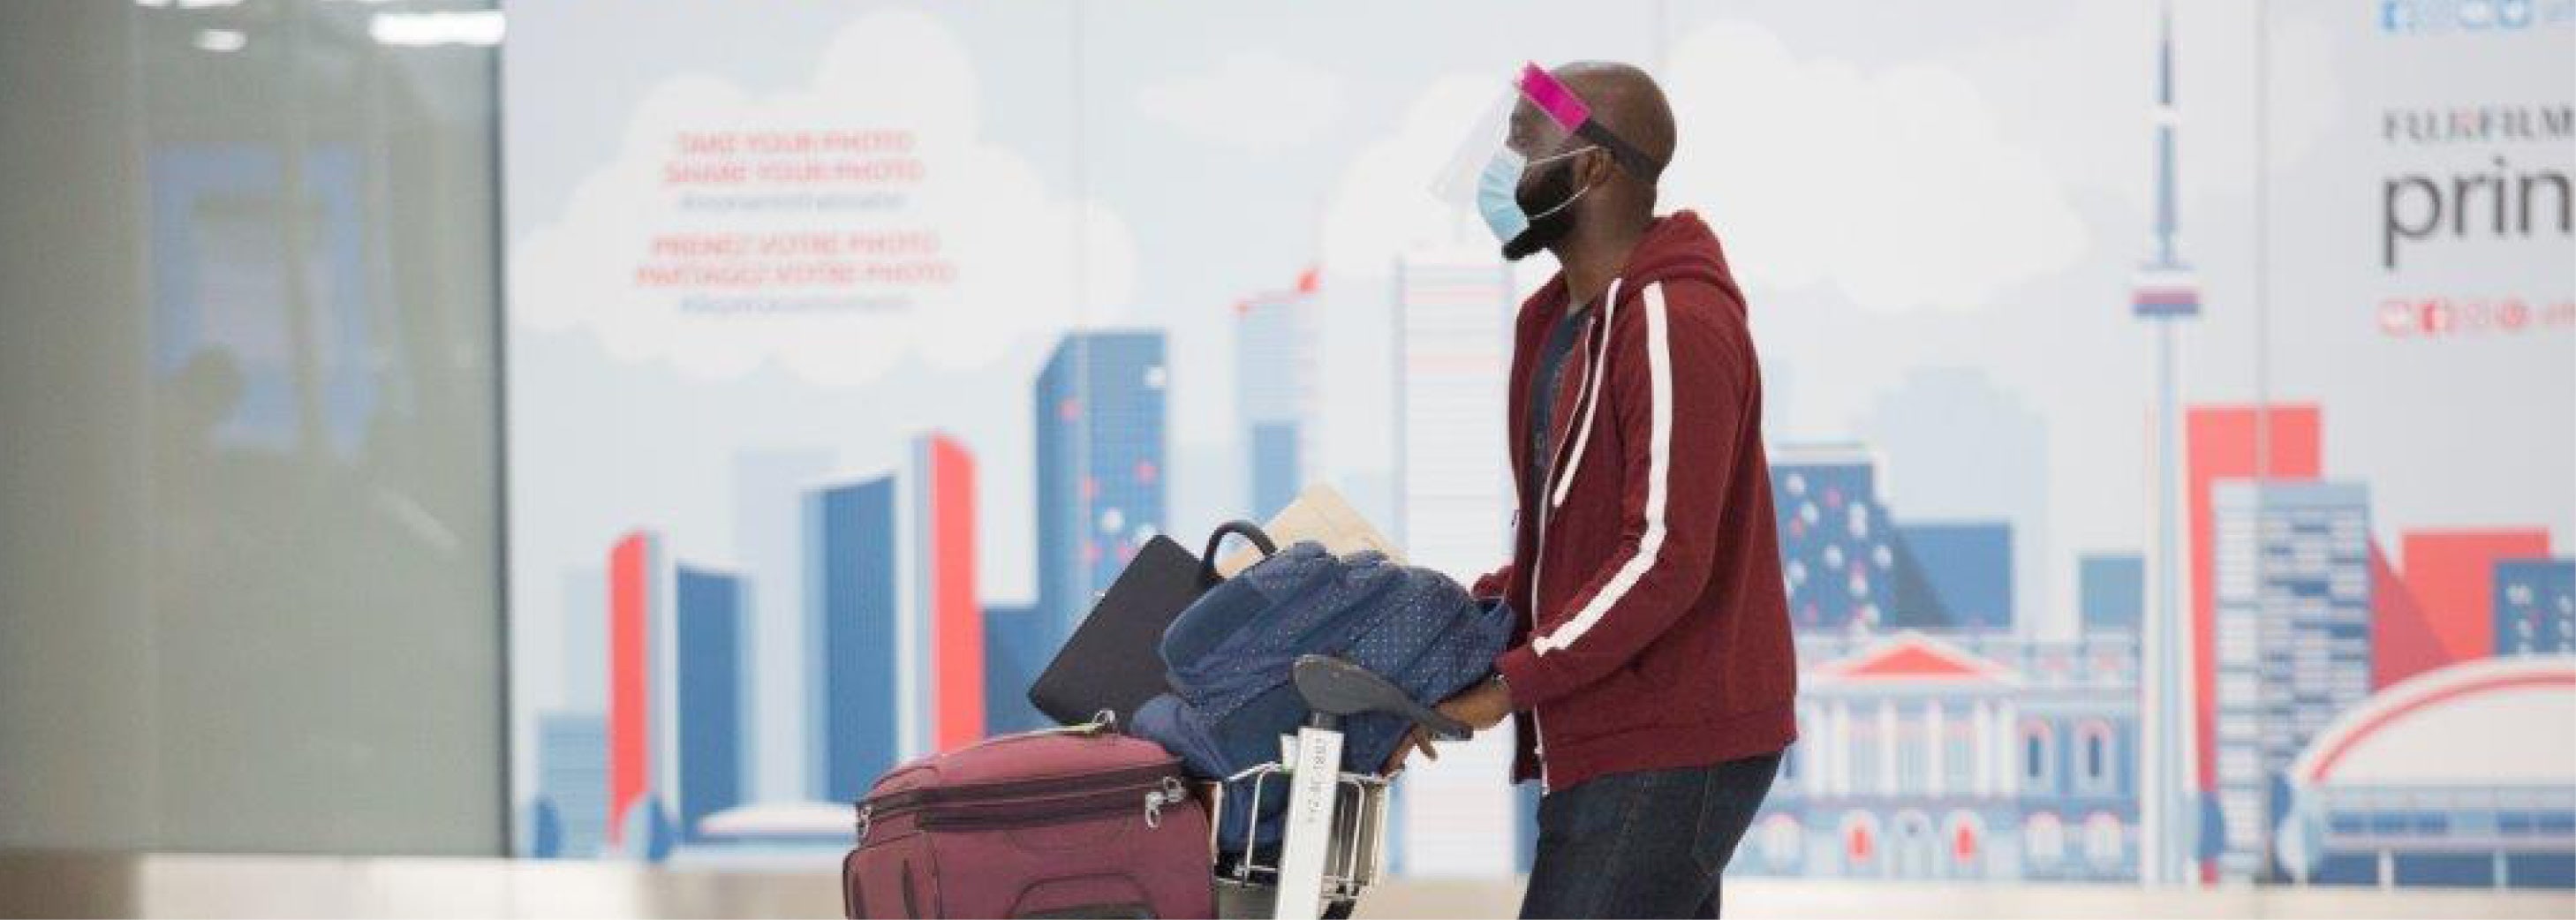 Man pushing luggage while wearing a face covering